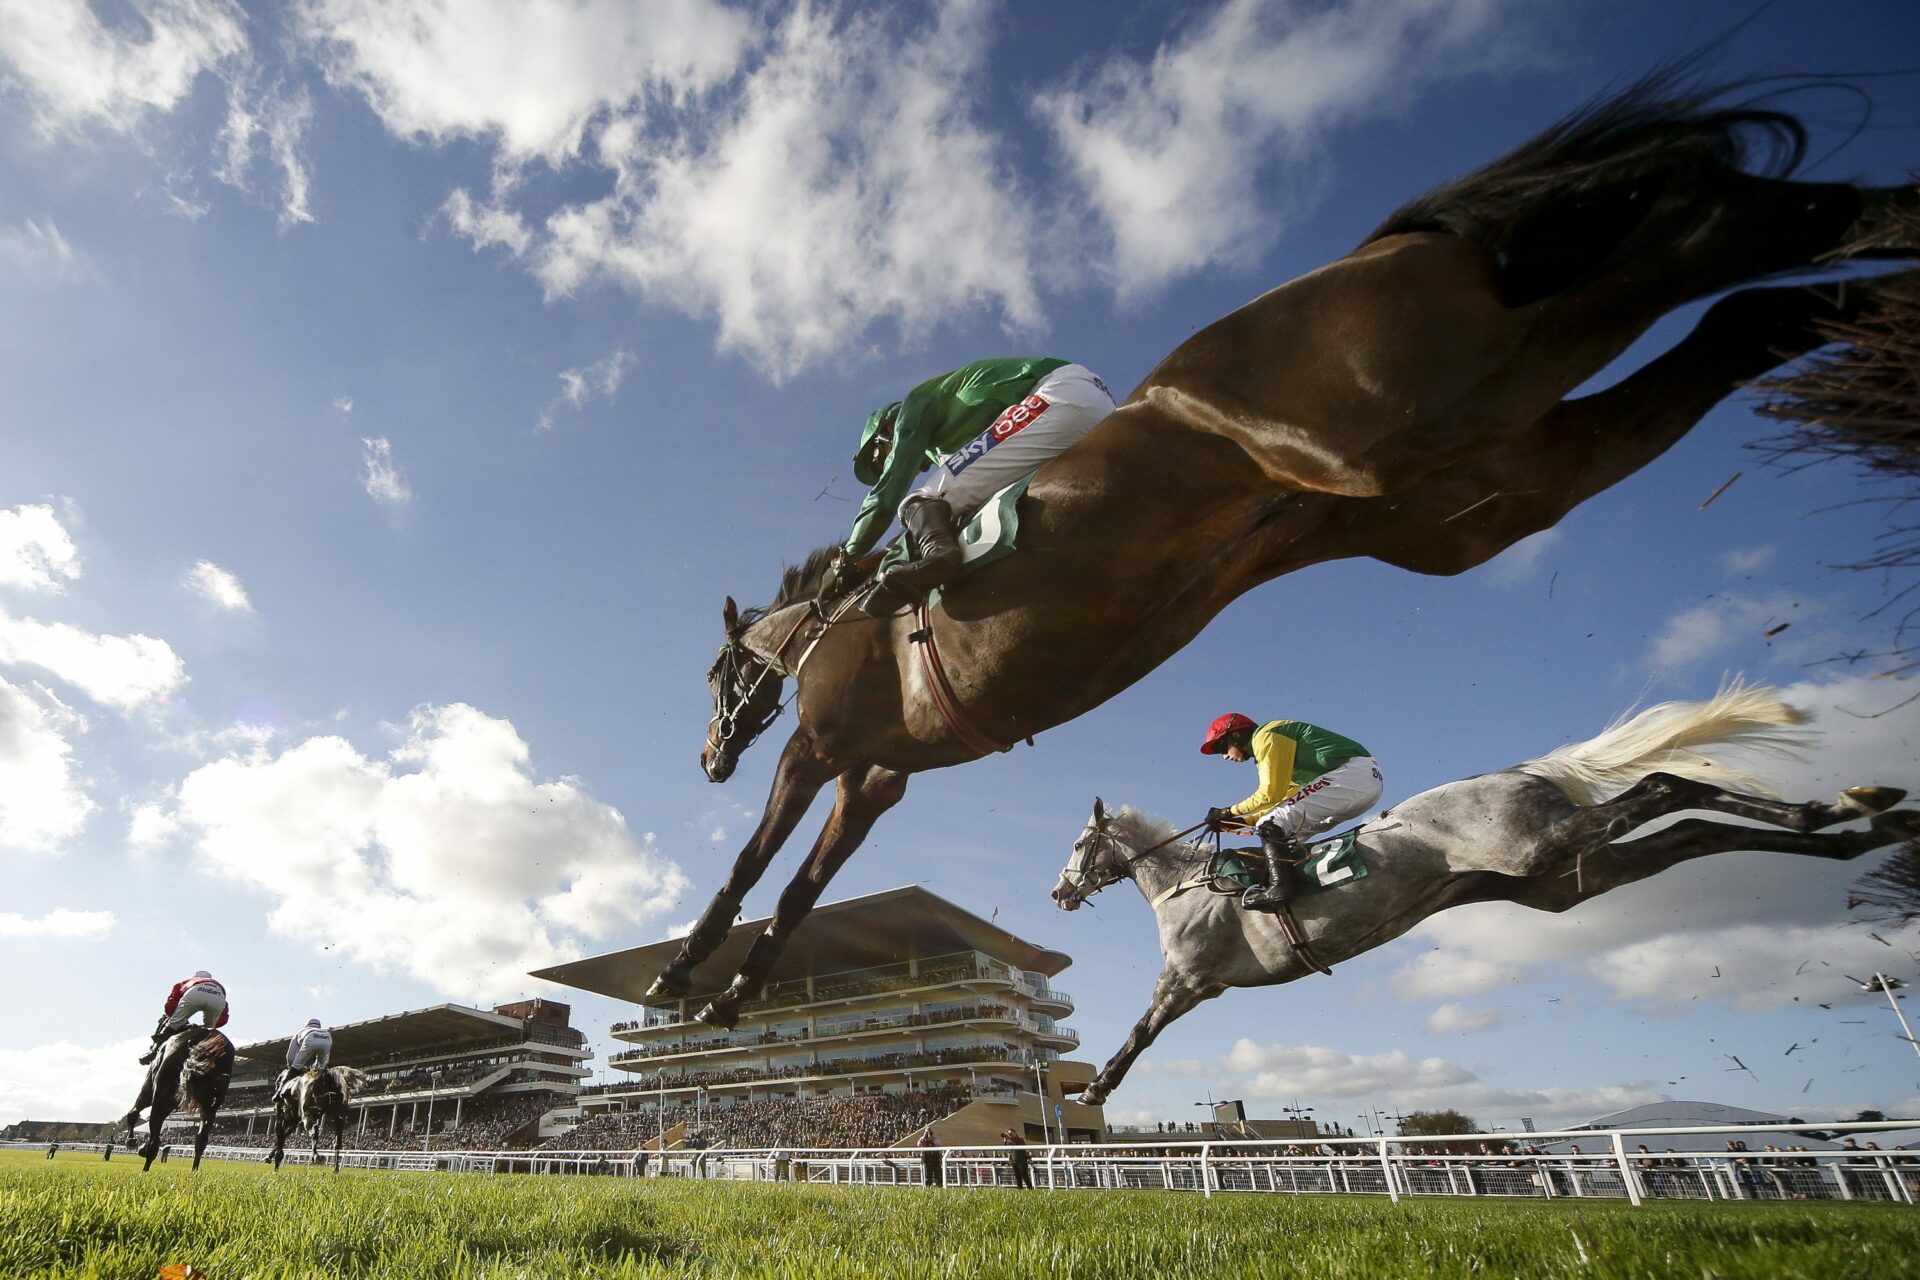 Image of a horse jumping for a ground view with the grandstand in the background